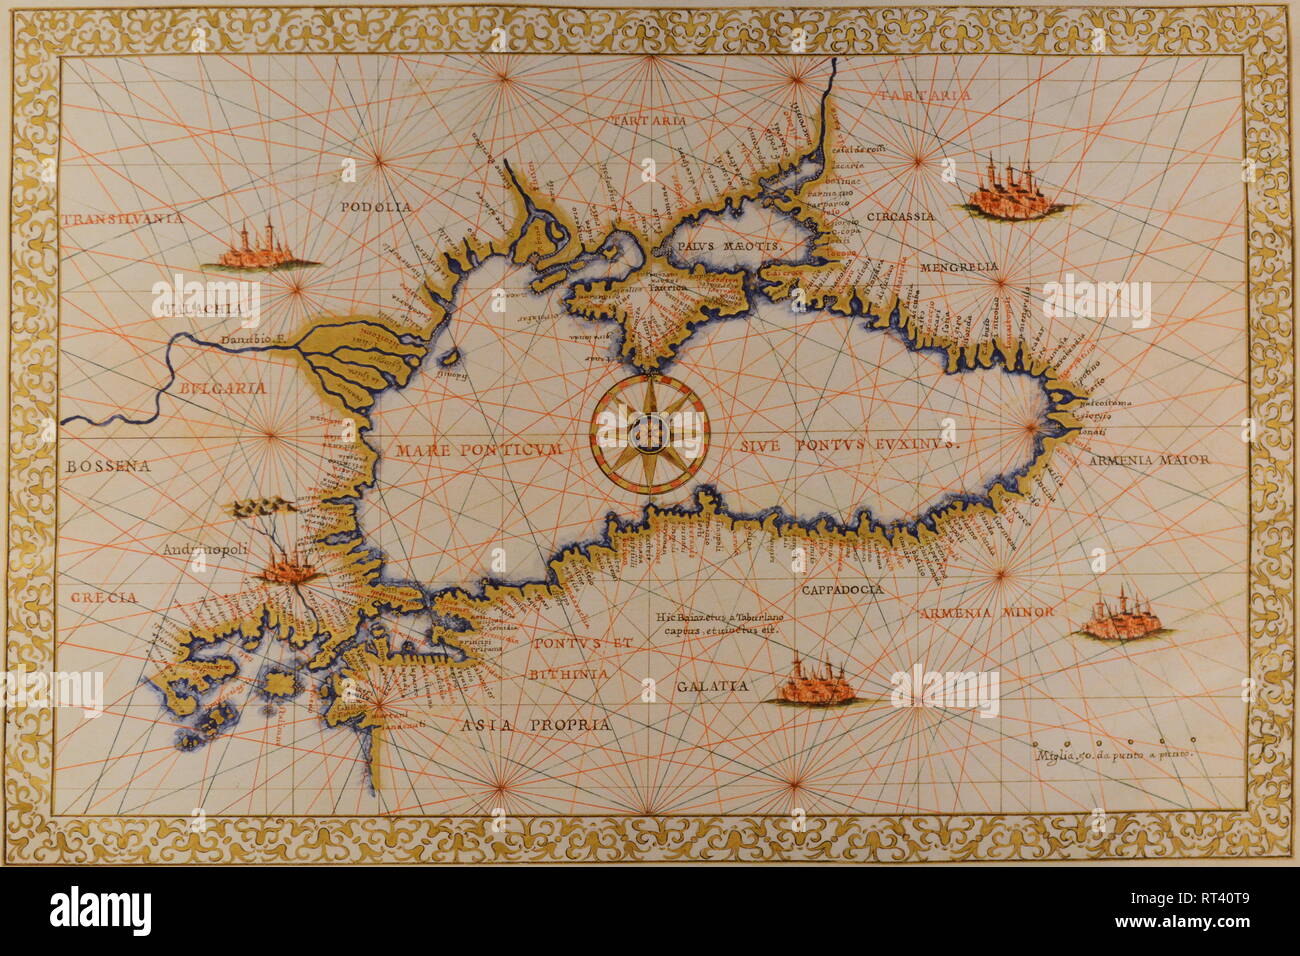 Kyiv, Ukraine. 26th Feb, 2019. Ancient map of the Crimea during the forum 'Amazing Stories of Crimea' devoted to the 5th anniversary of the military occupation of the Crimea by Russia Credit: Aleksandr Gusev/Pacific Press/Alamy Live News Stock Photo